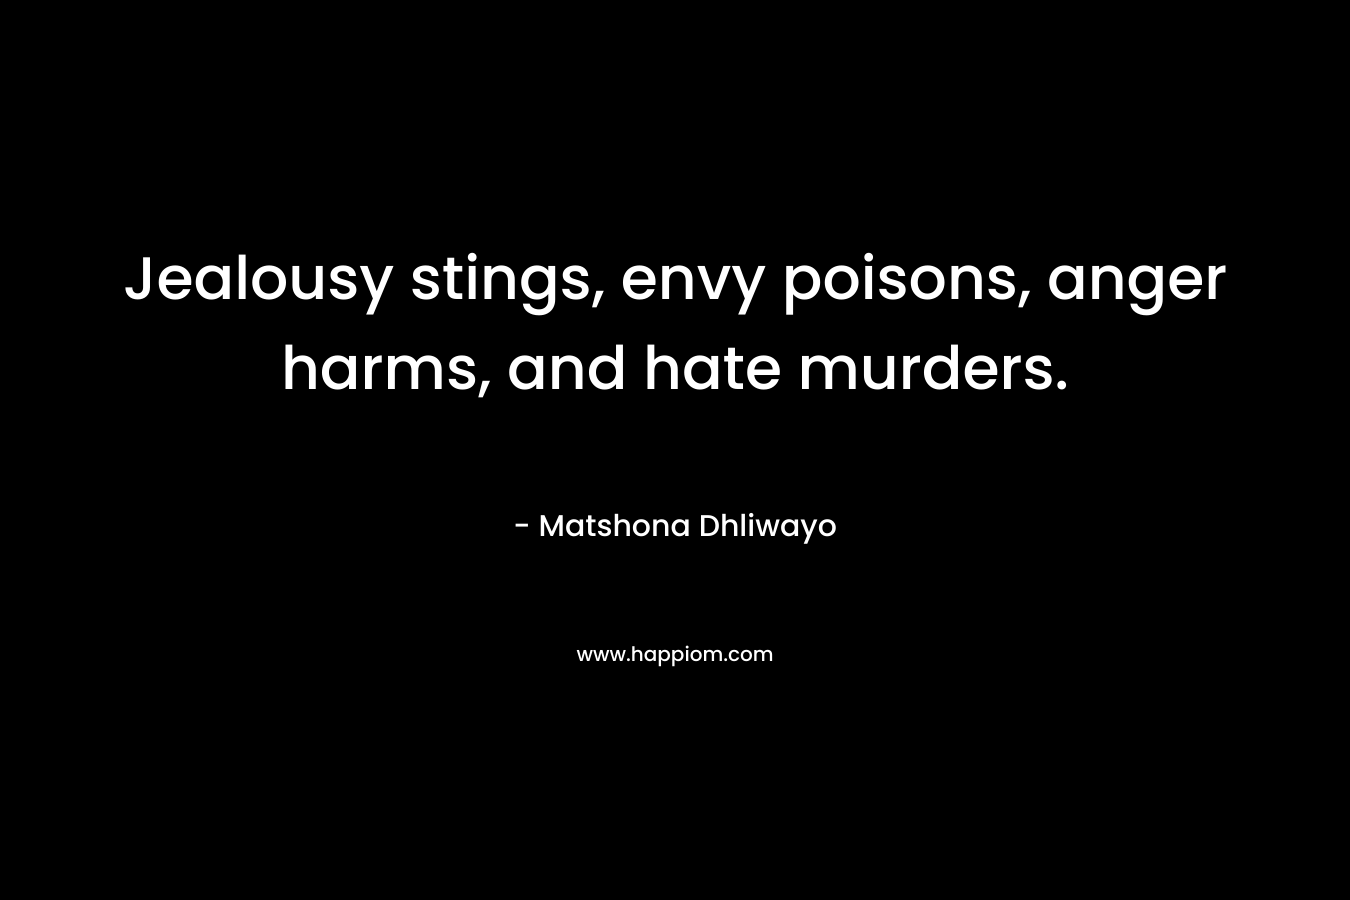 Jealousy stings, envy poisons, anger harms, and hate murders. – Matshona Dhliwayo